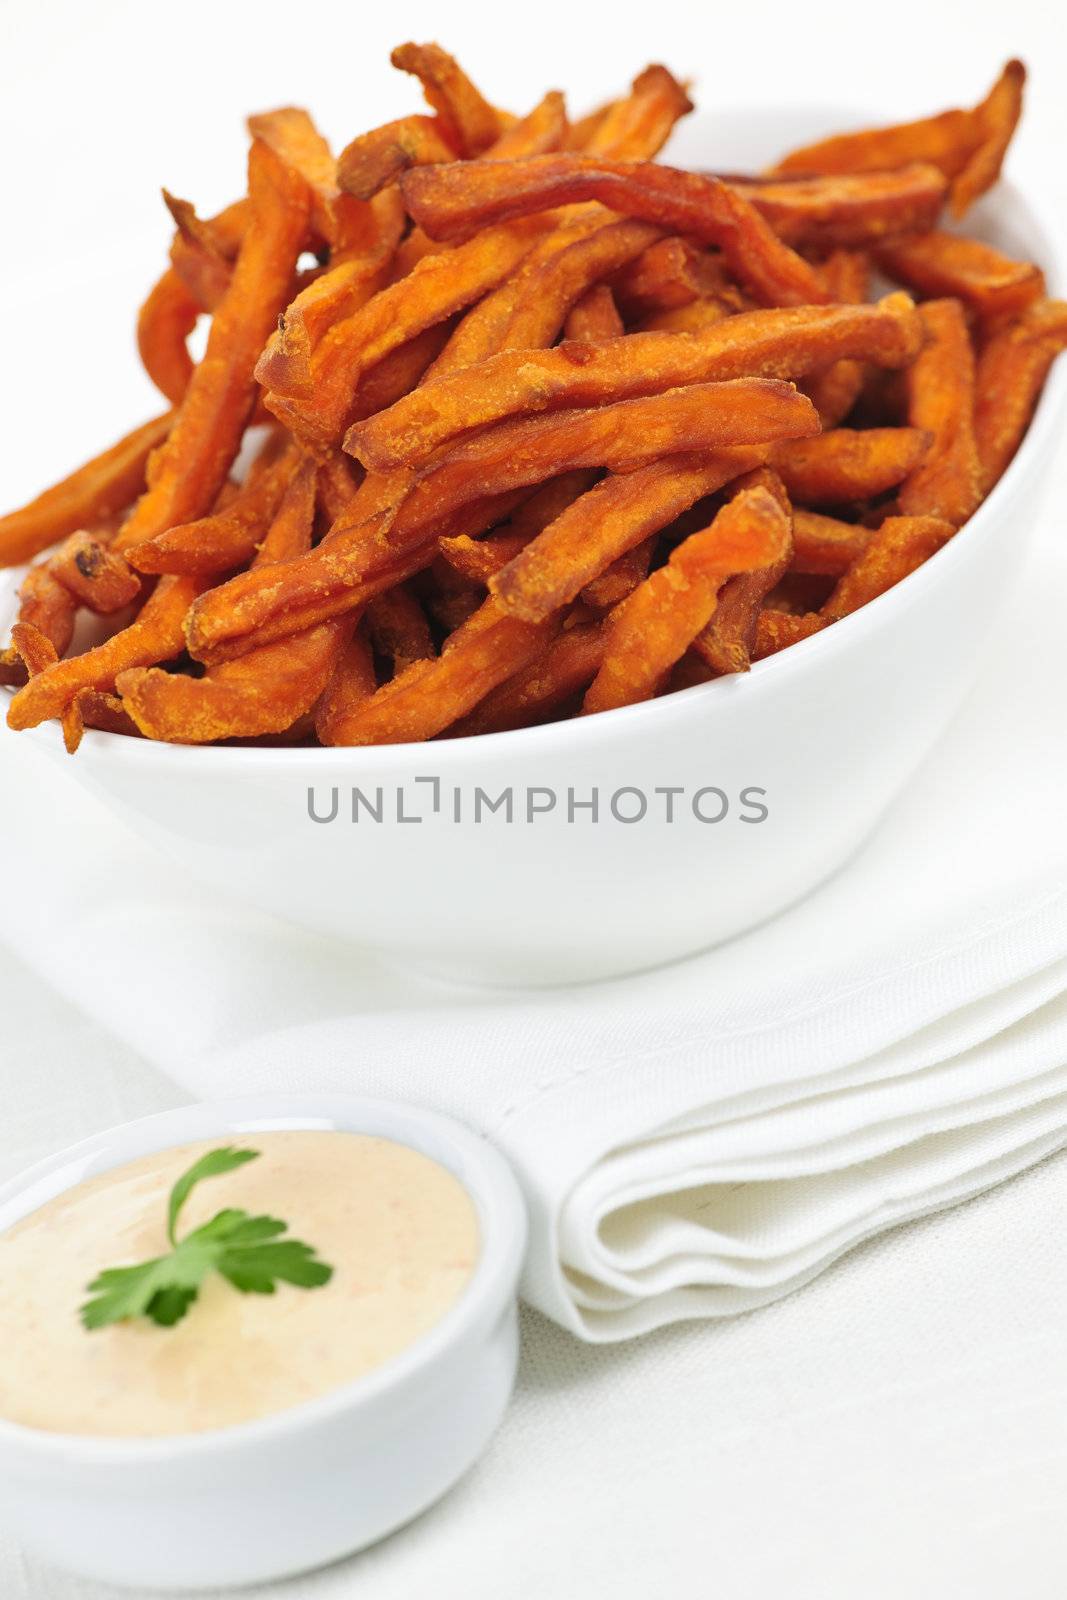 Bowl of sweet potato or yam fries with dipping sauce